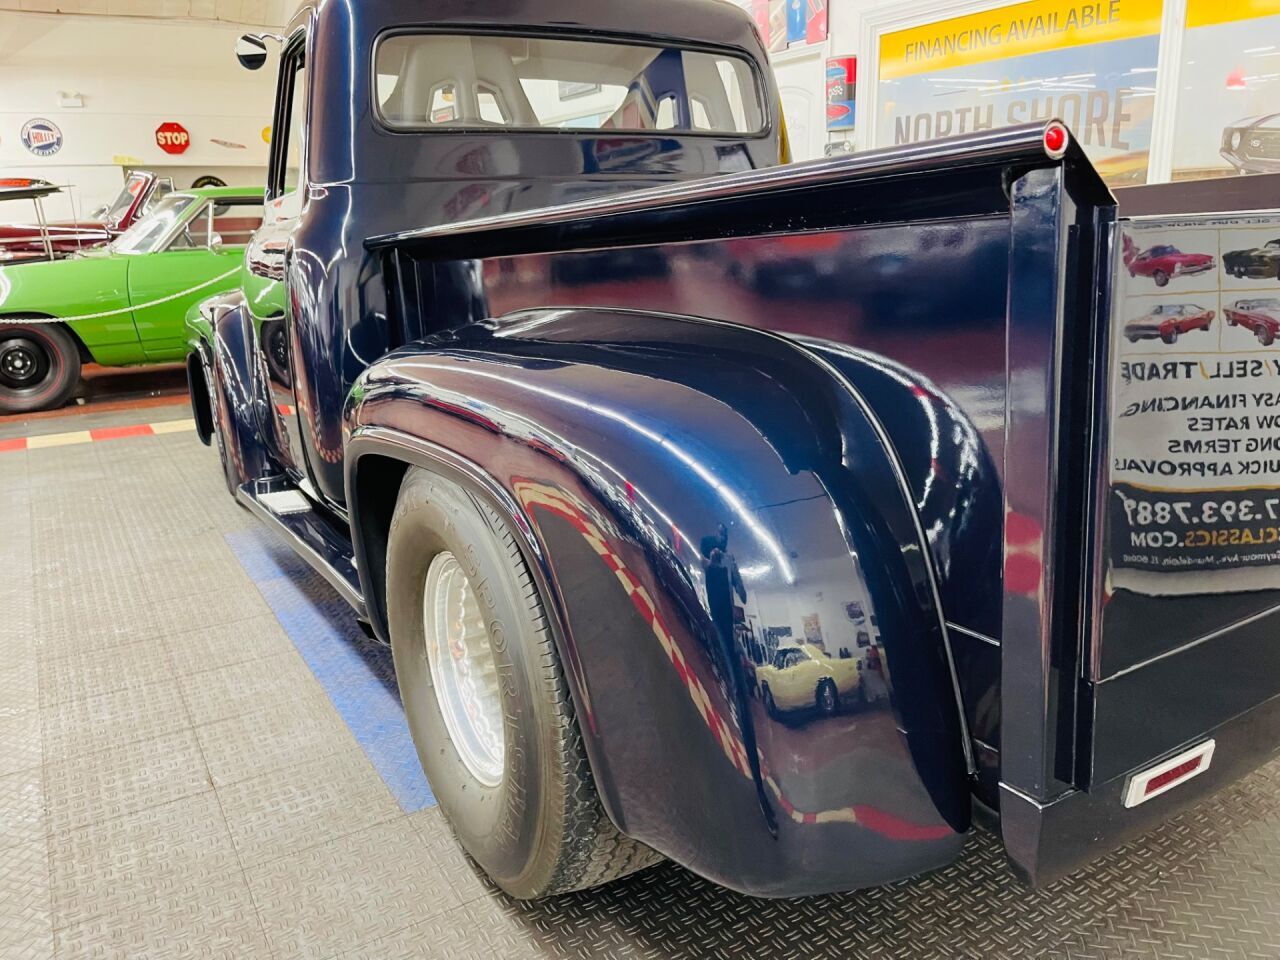 1953 Ford F-100 25